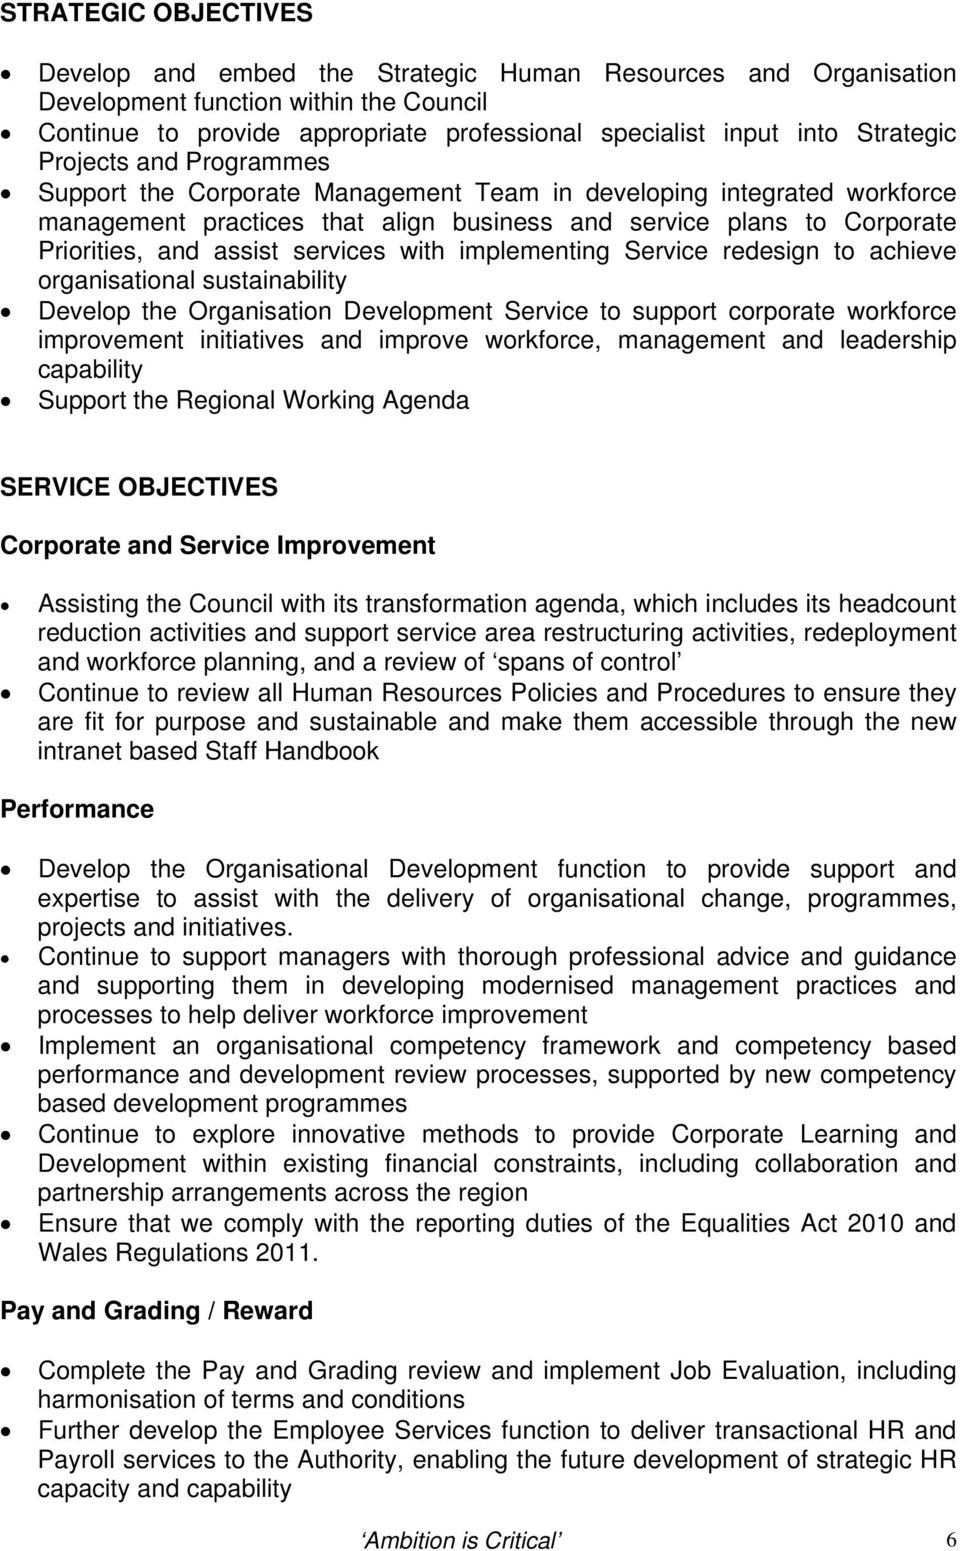 assist services with implementing Service redesign to achieve organisational sustainability Develop the Organisation Development Service to support corporate workforce improvement initiatives and